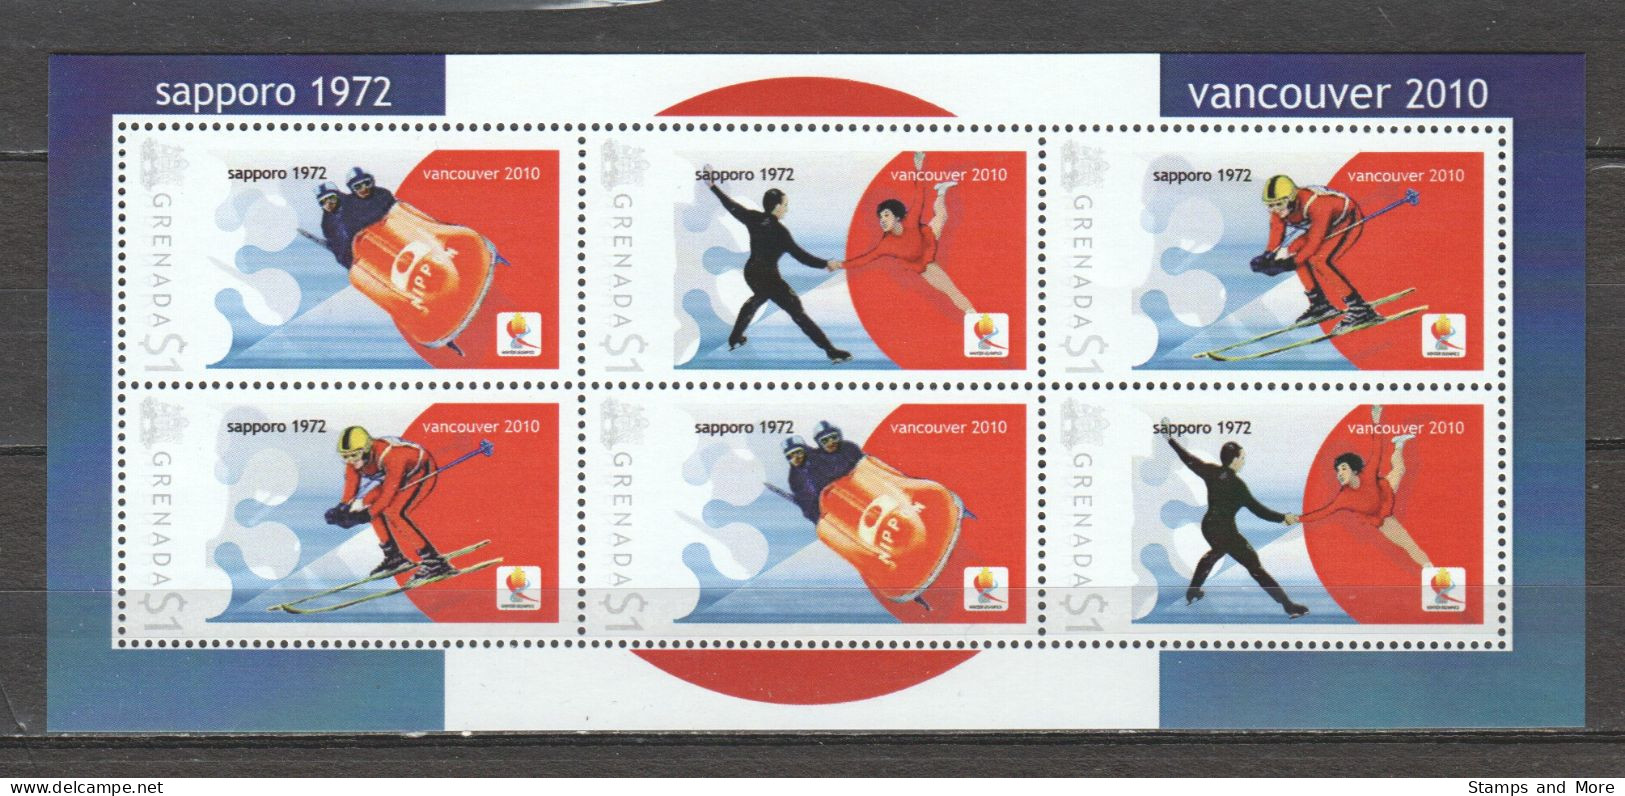 Grenada - Limited Edition Sheet 11 MNH - WINTER OLYMPICS VANCOUVER 2010 - SAPORRO 1972 - Hiver 2010: Vancouver